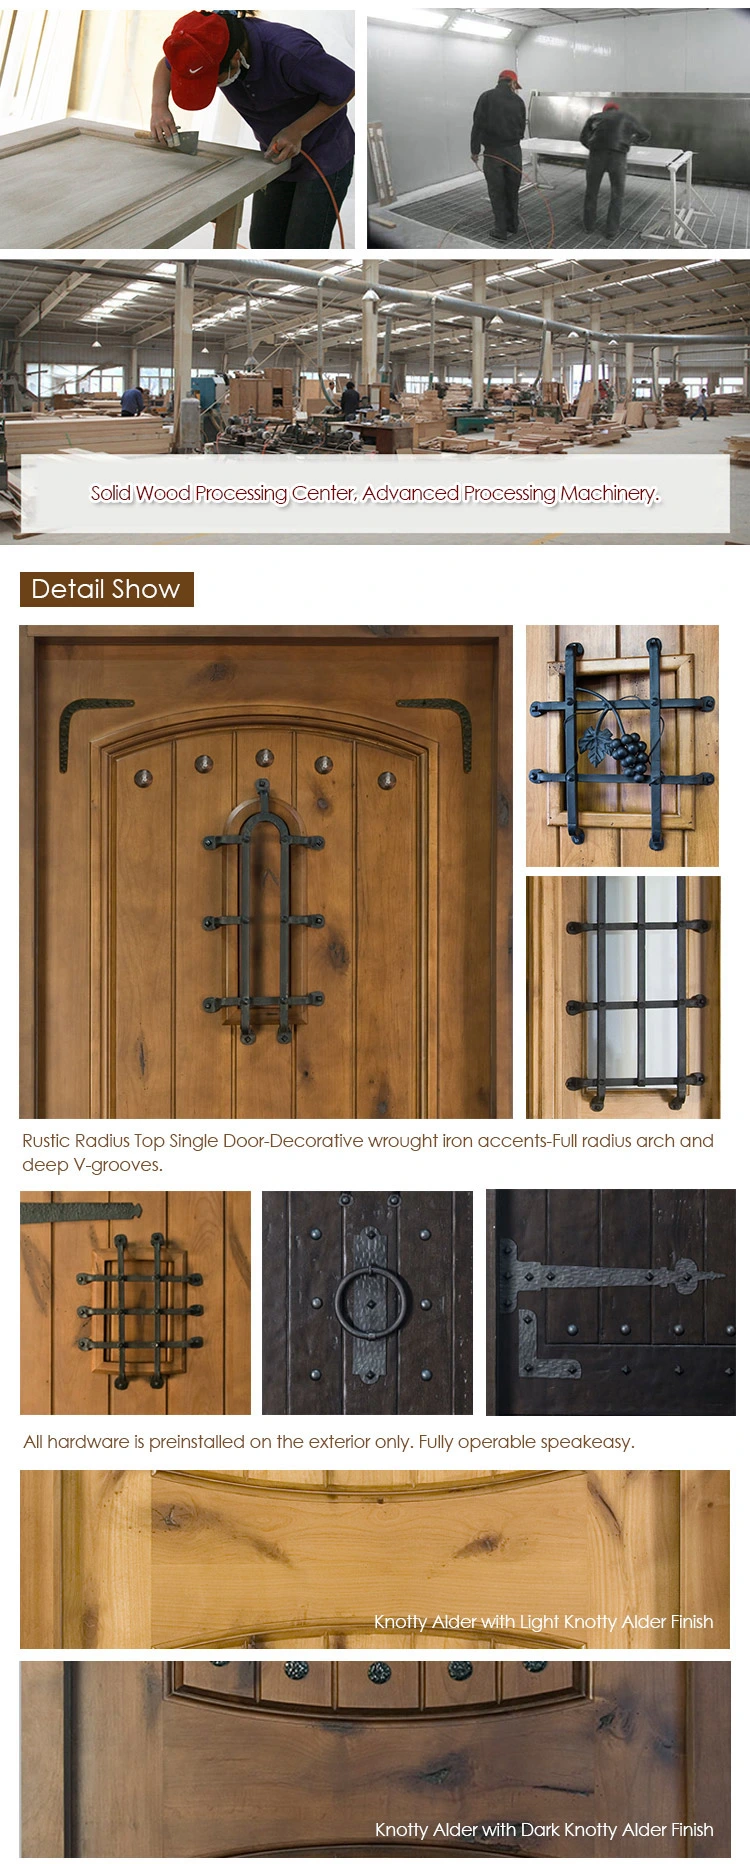 Arched Top Iron Clavos Door Design with Q-Lon Weather Strip Insulation and Solid Wood Front Door Frame